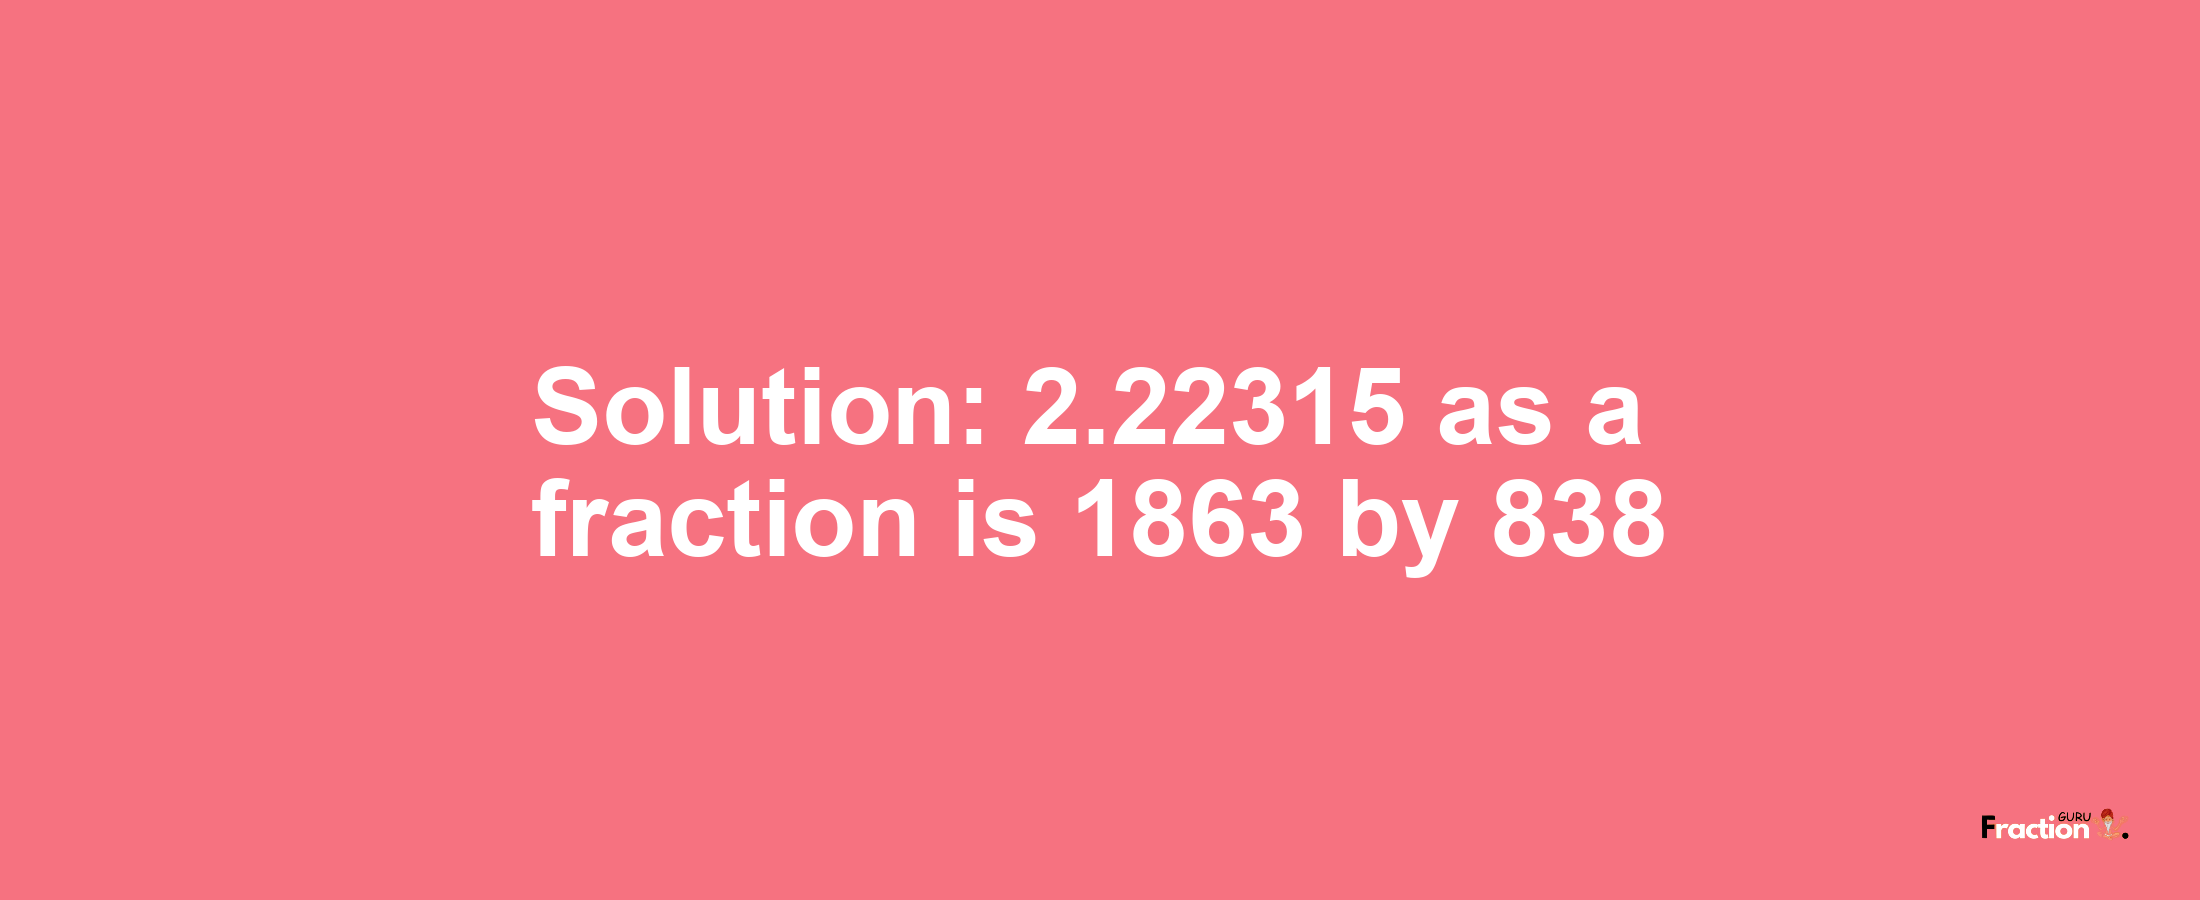 Solution:2.22315 as a fraction is 1863/838